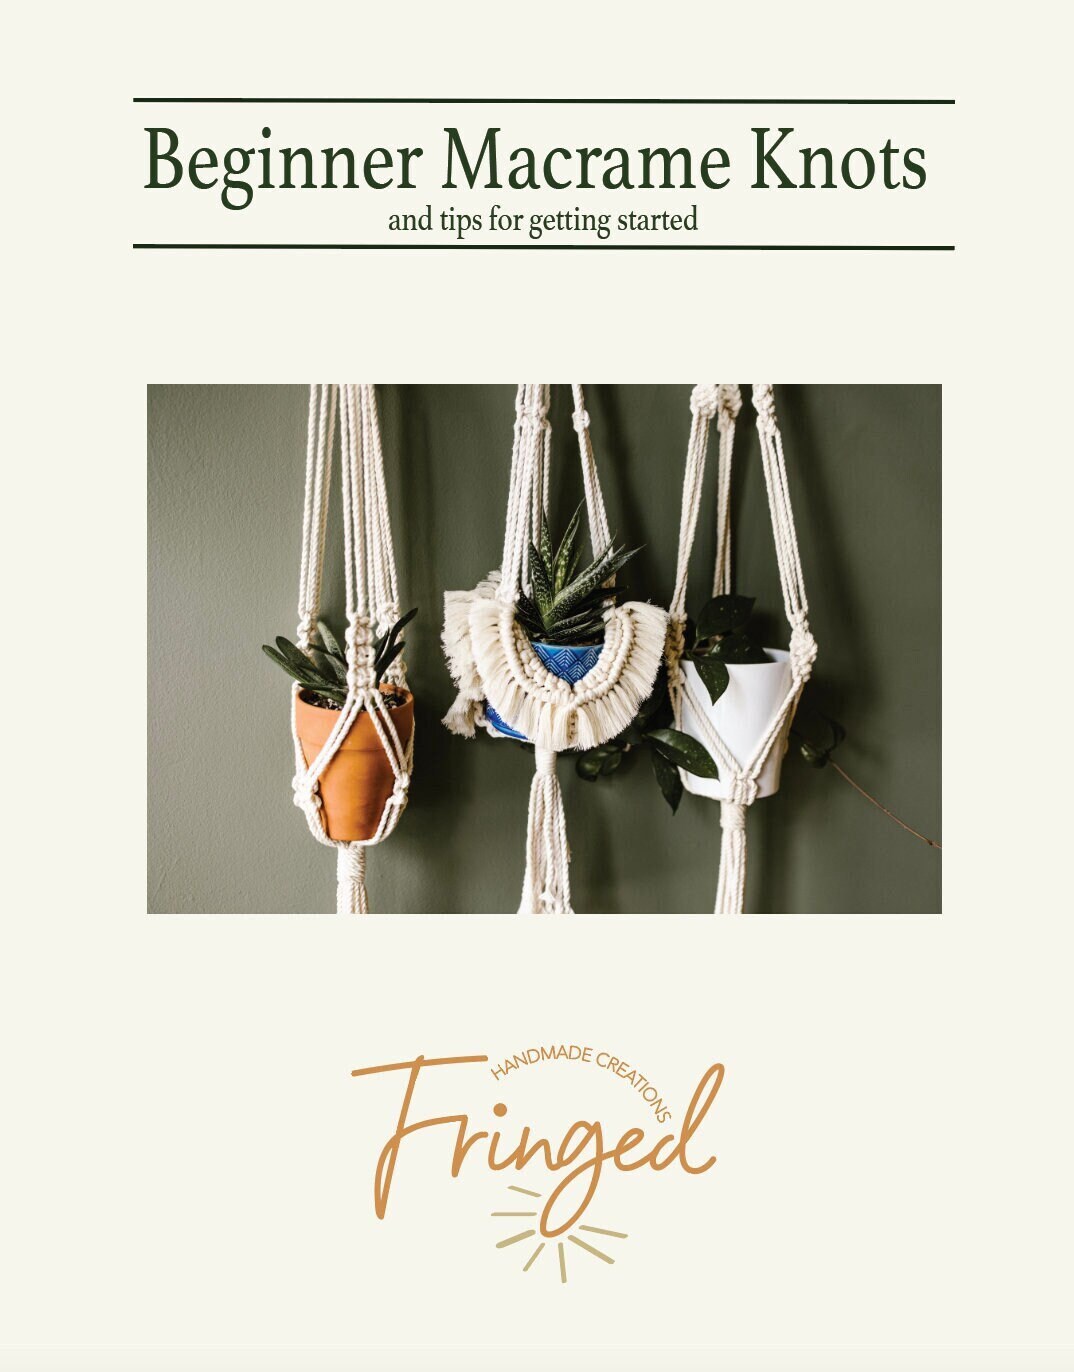 Why Knot - DIY Macrame Plant Hanger Kit – whyknotpa